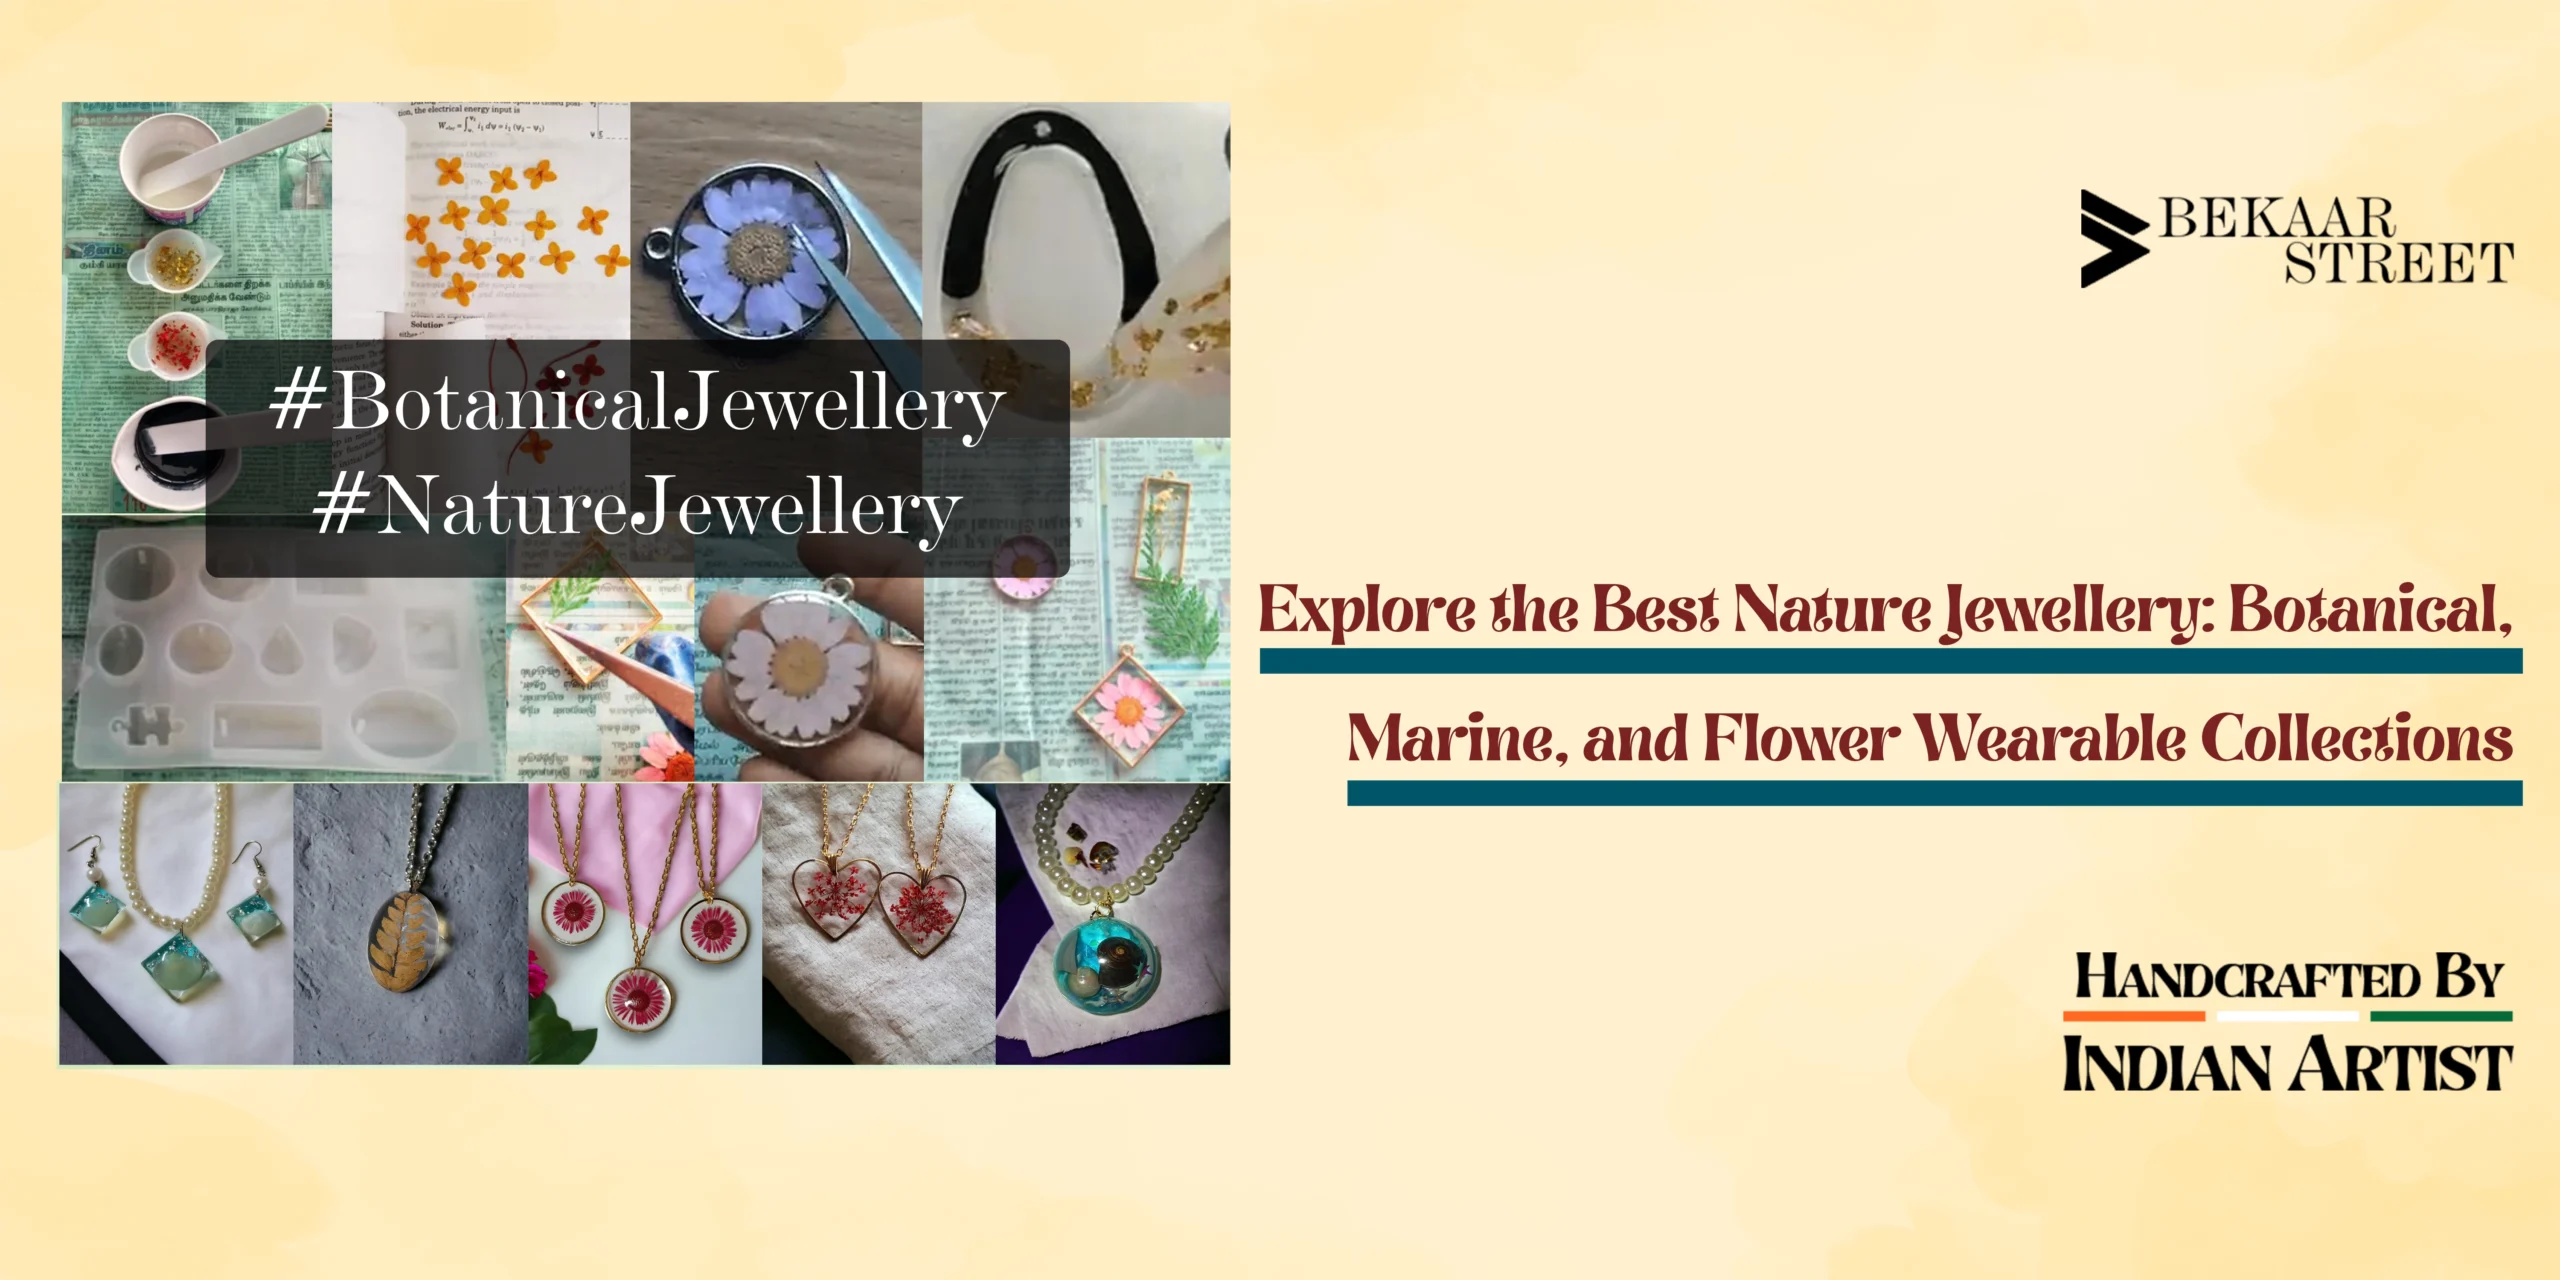 Explore the Best Nature Jewellery: Botanical, Marine, and Flower Wearable Collections